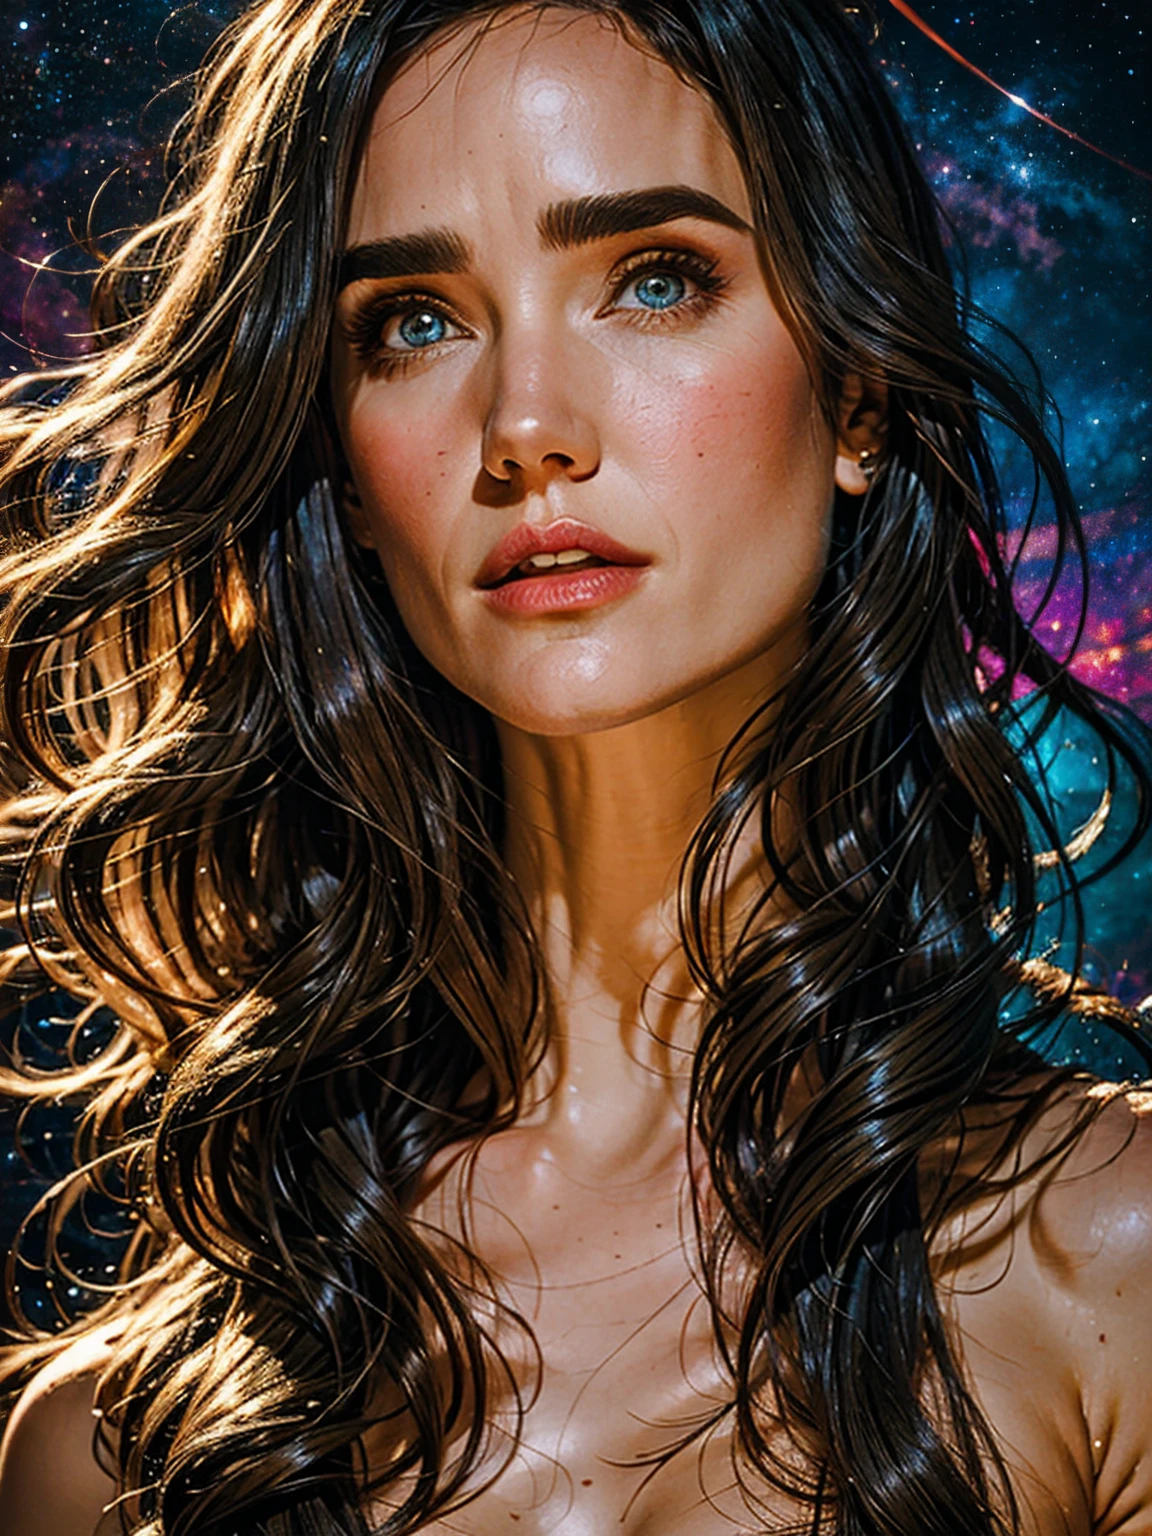 best quality, realistic, portrait, "topless woman", "beautiful detailed eyes", "soft and delicate skin", "long flowing hair", "elegant and graceful pose", "subtle lighting", "subtle background", "oil painting style", "vivid colors" very slutty, space background 